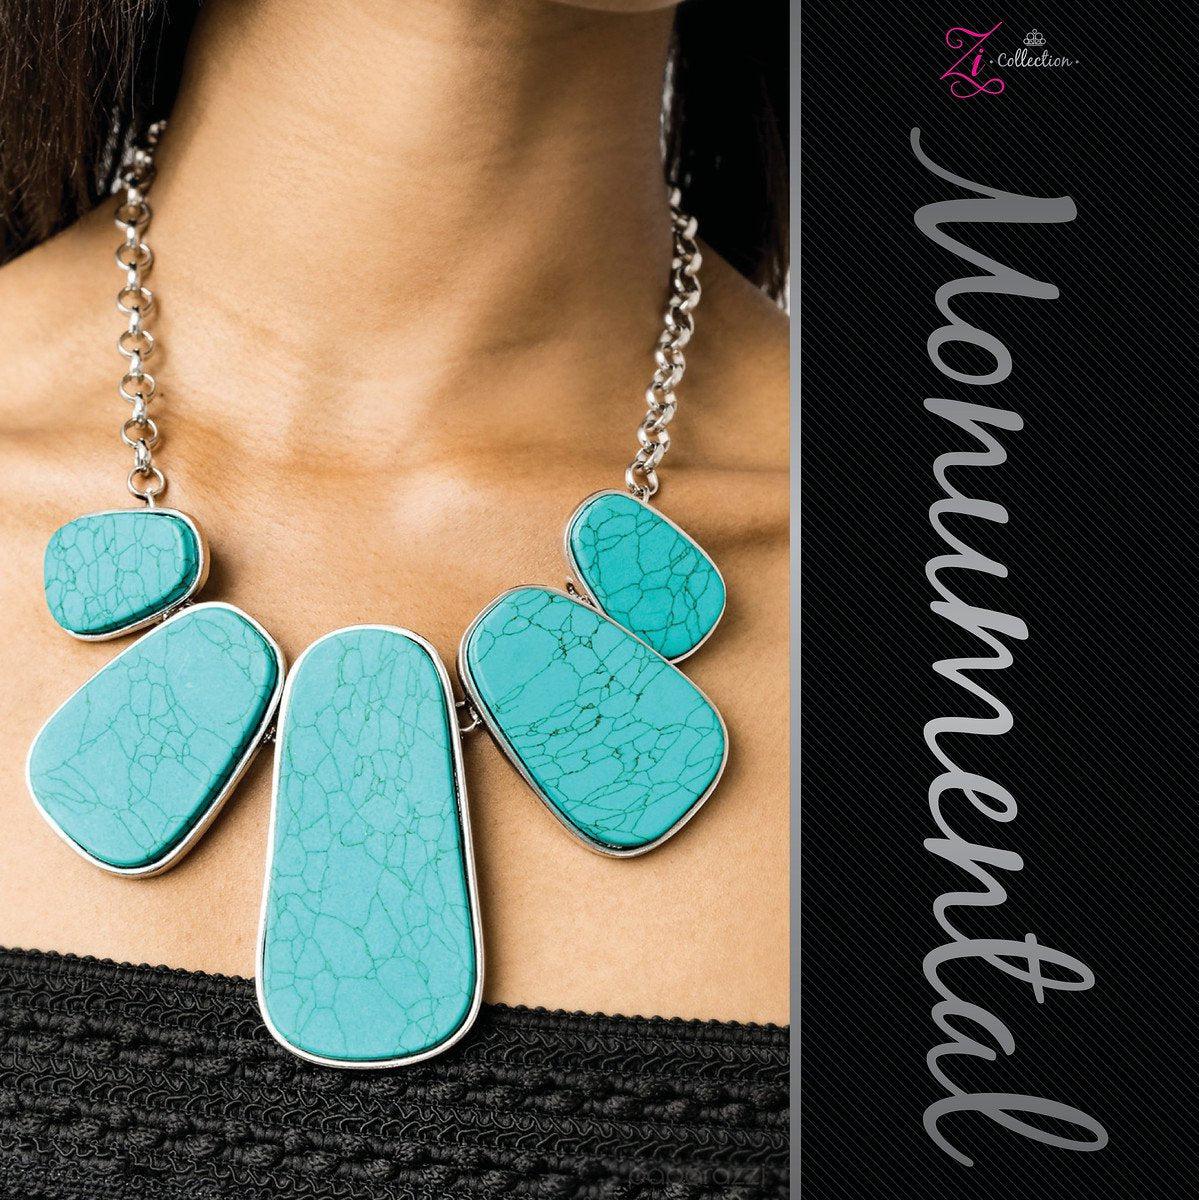 Monumental 2019 Zi Collection Necklace and matching Earrings - Paparazzi Accessories-CarasShop.com - $5 Jewelry by Cara Jewels